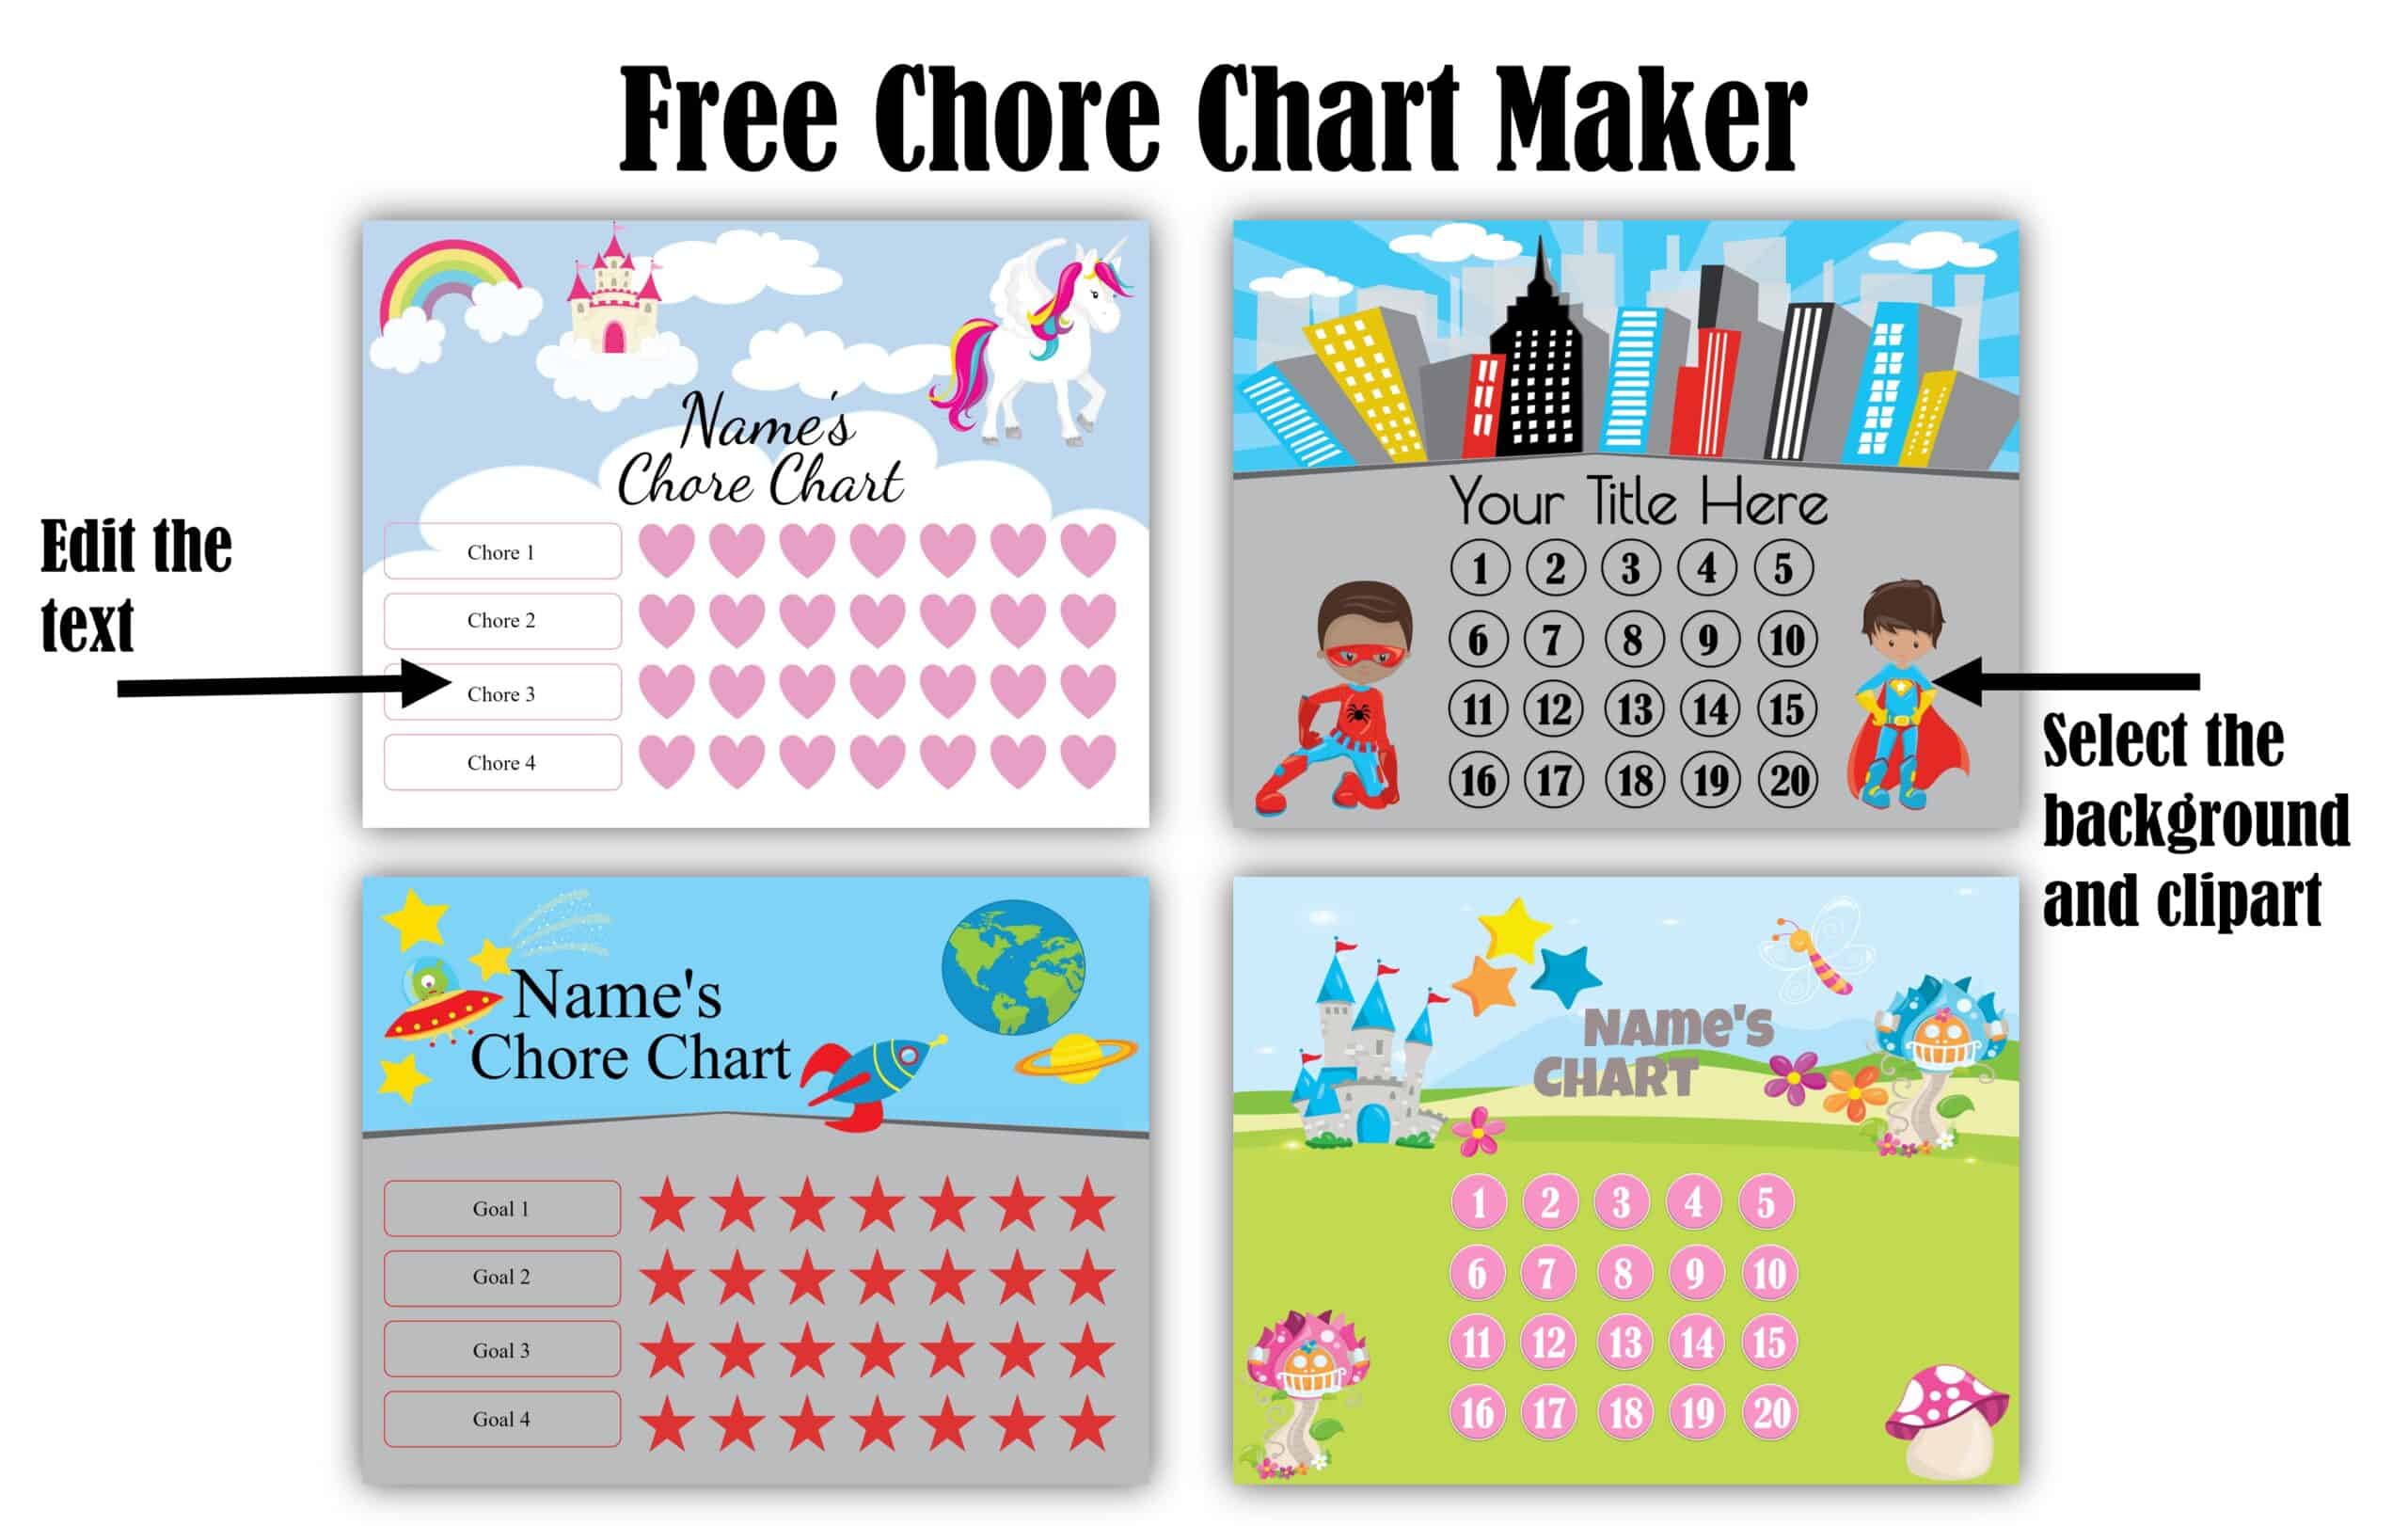 chores-for-14-year-olds-chore-list-free-chore-charts